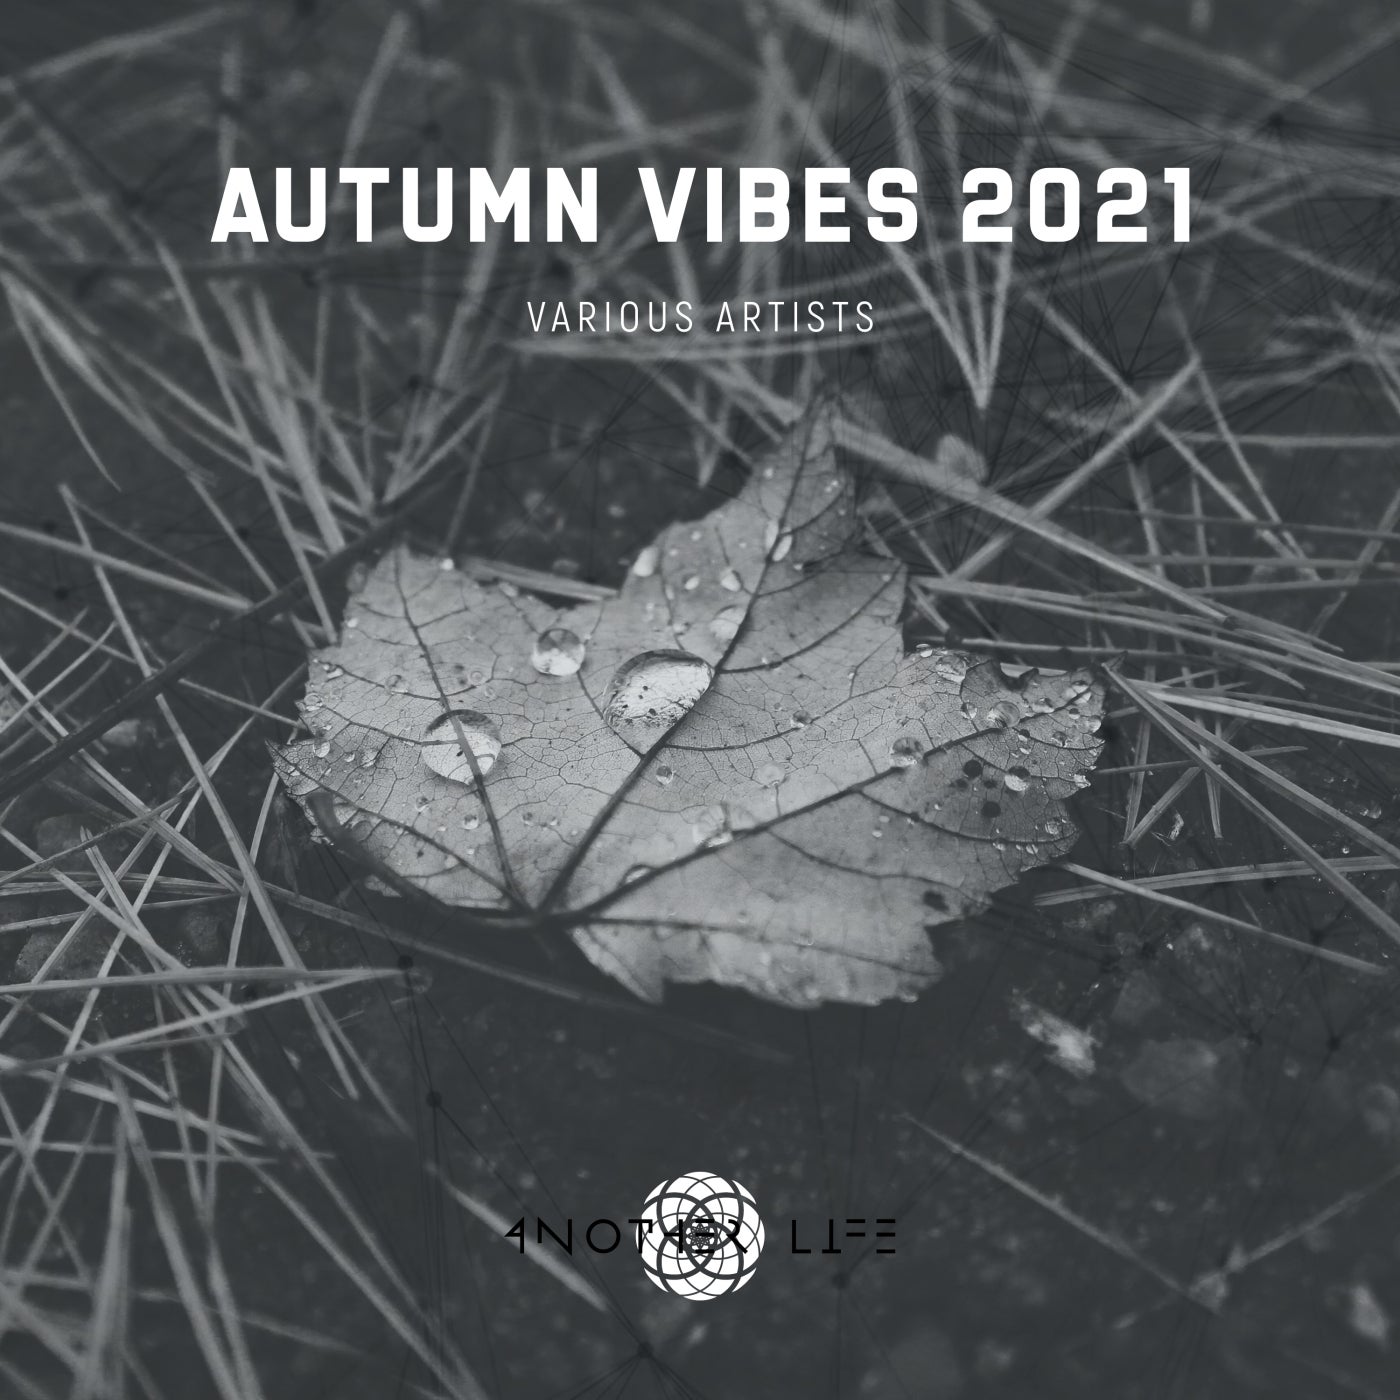 Agustin Pietrocola, Christopher Hermann - Autumn Vibes 2021 [Another Life Music]